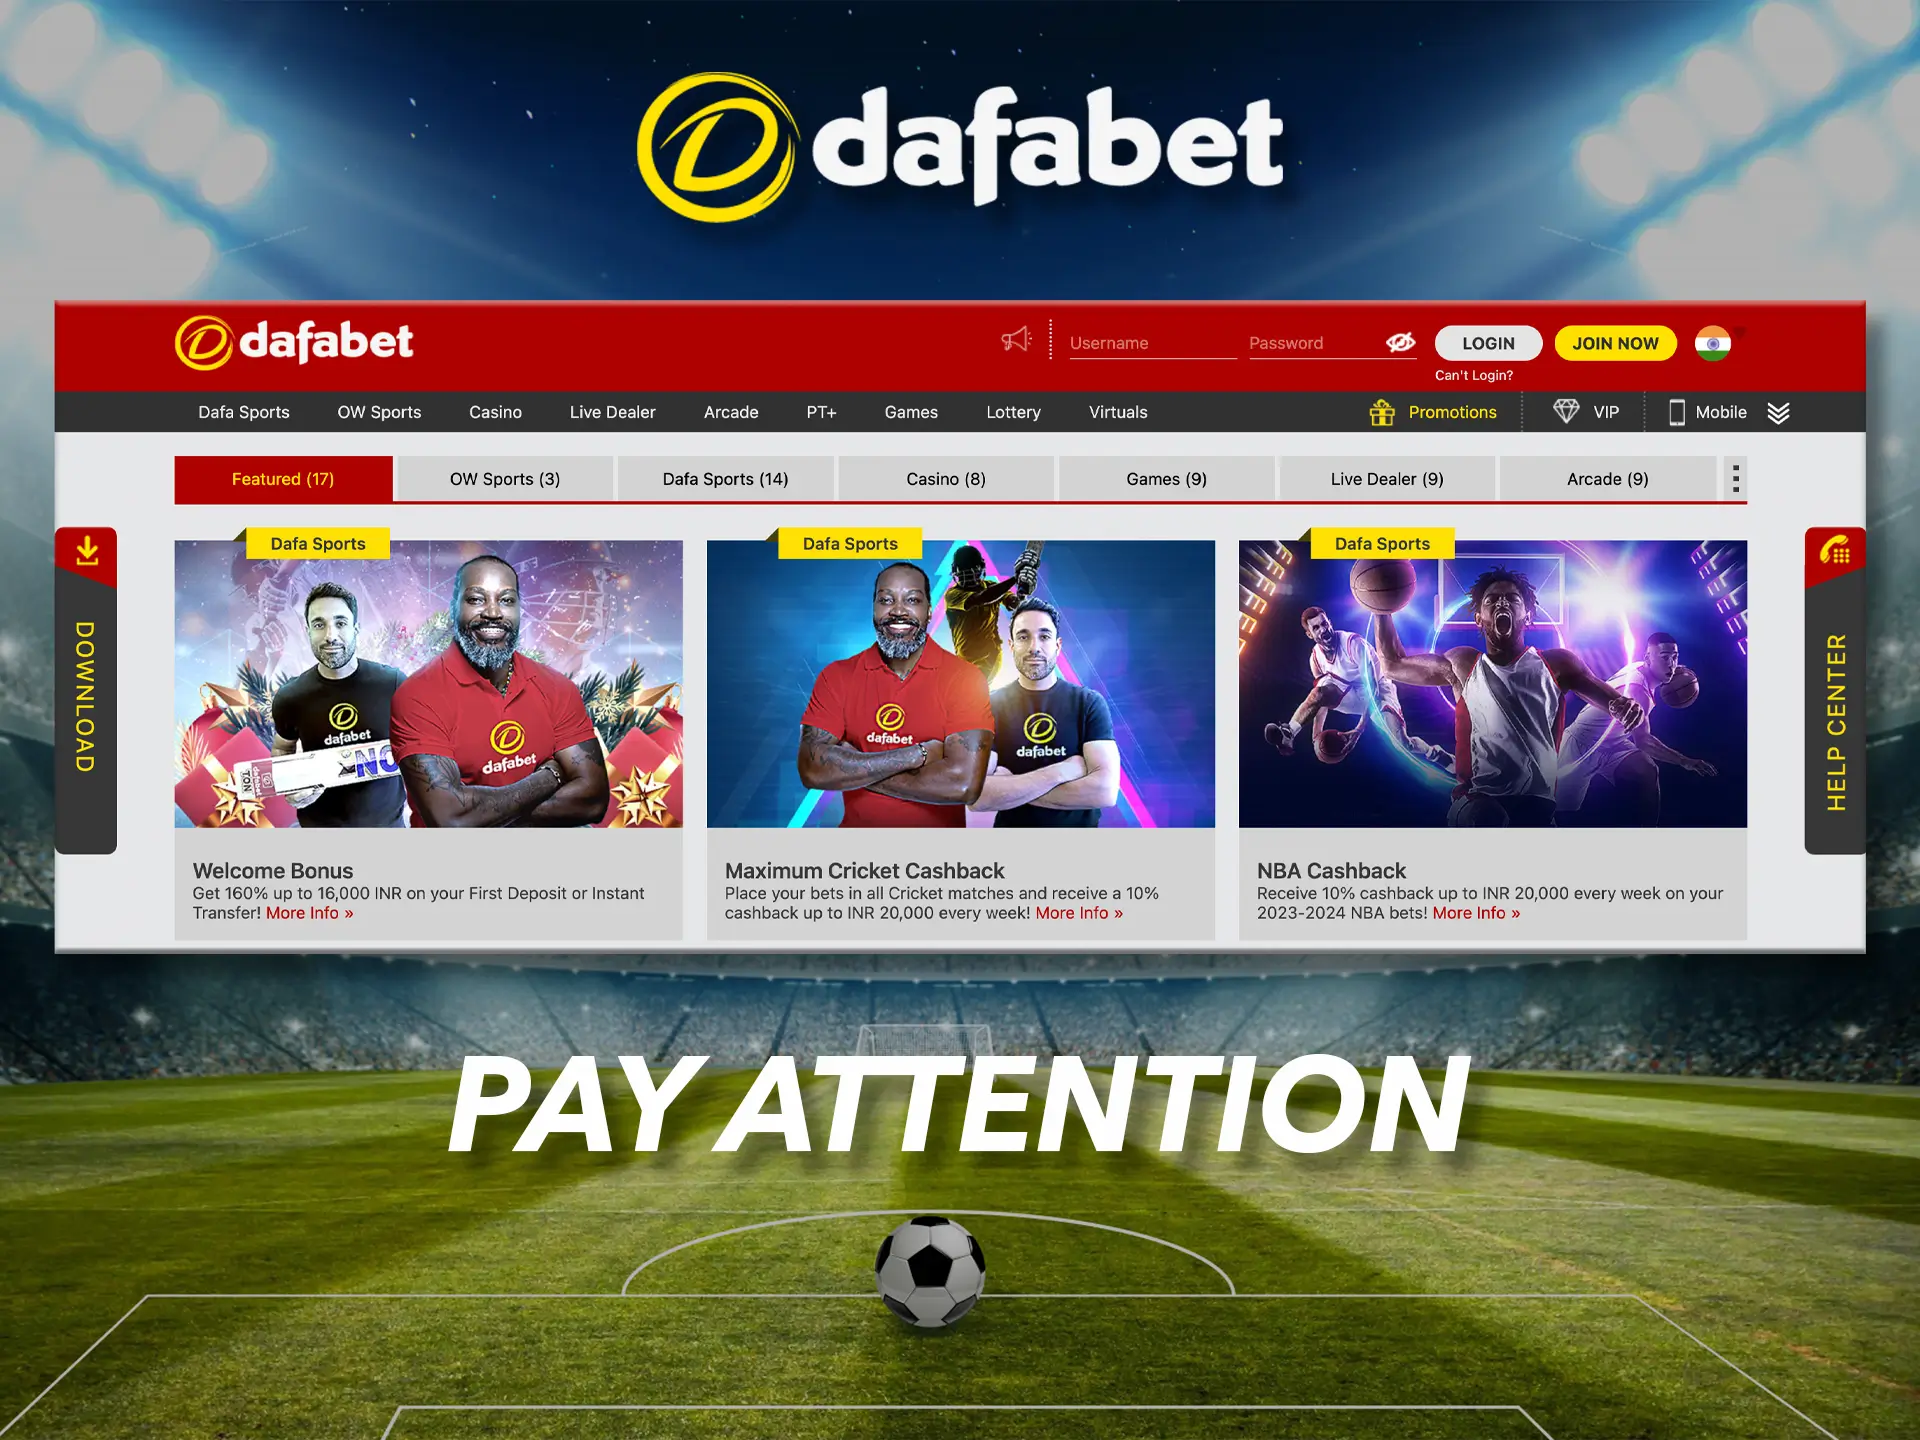 Look out for bonuses and promotions from Dafabet.